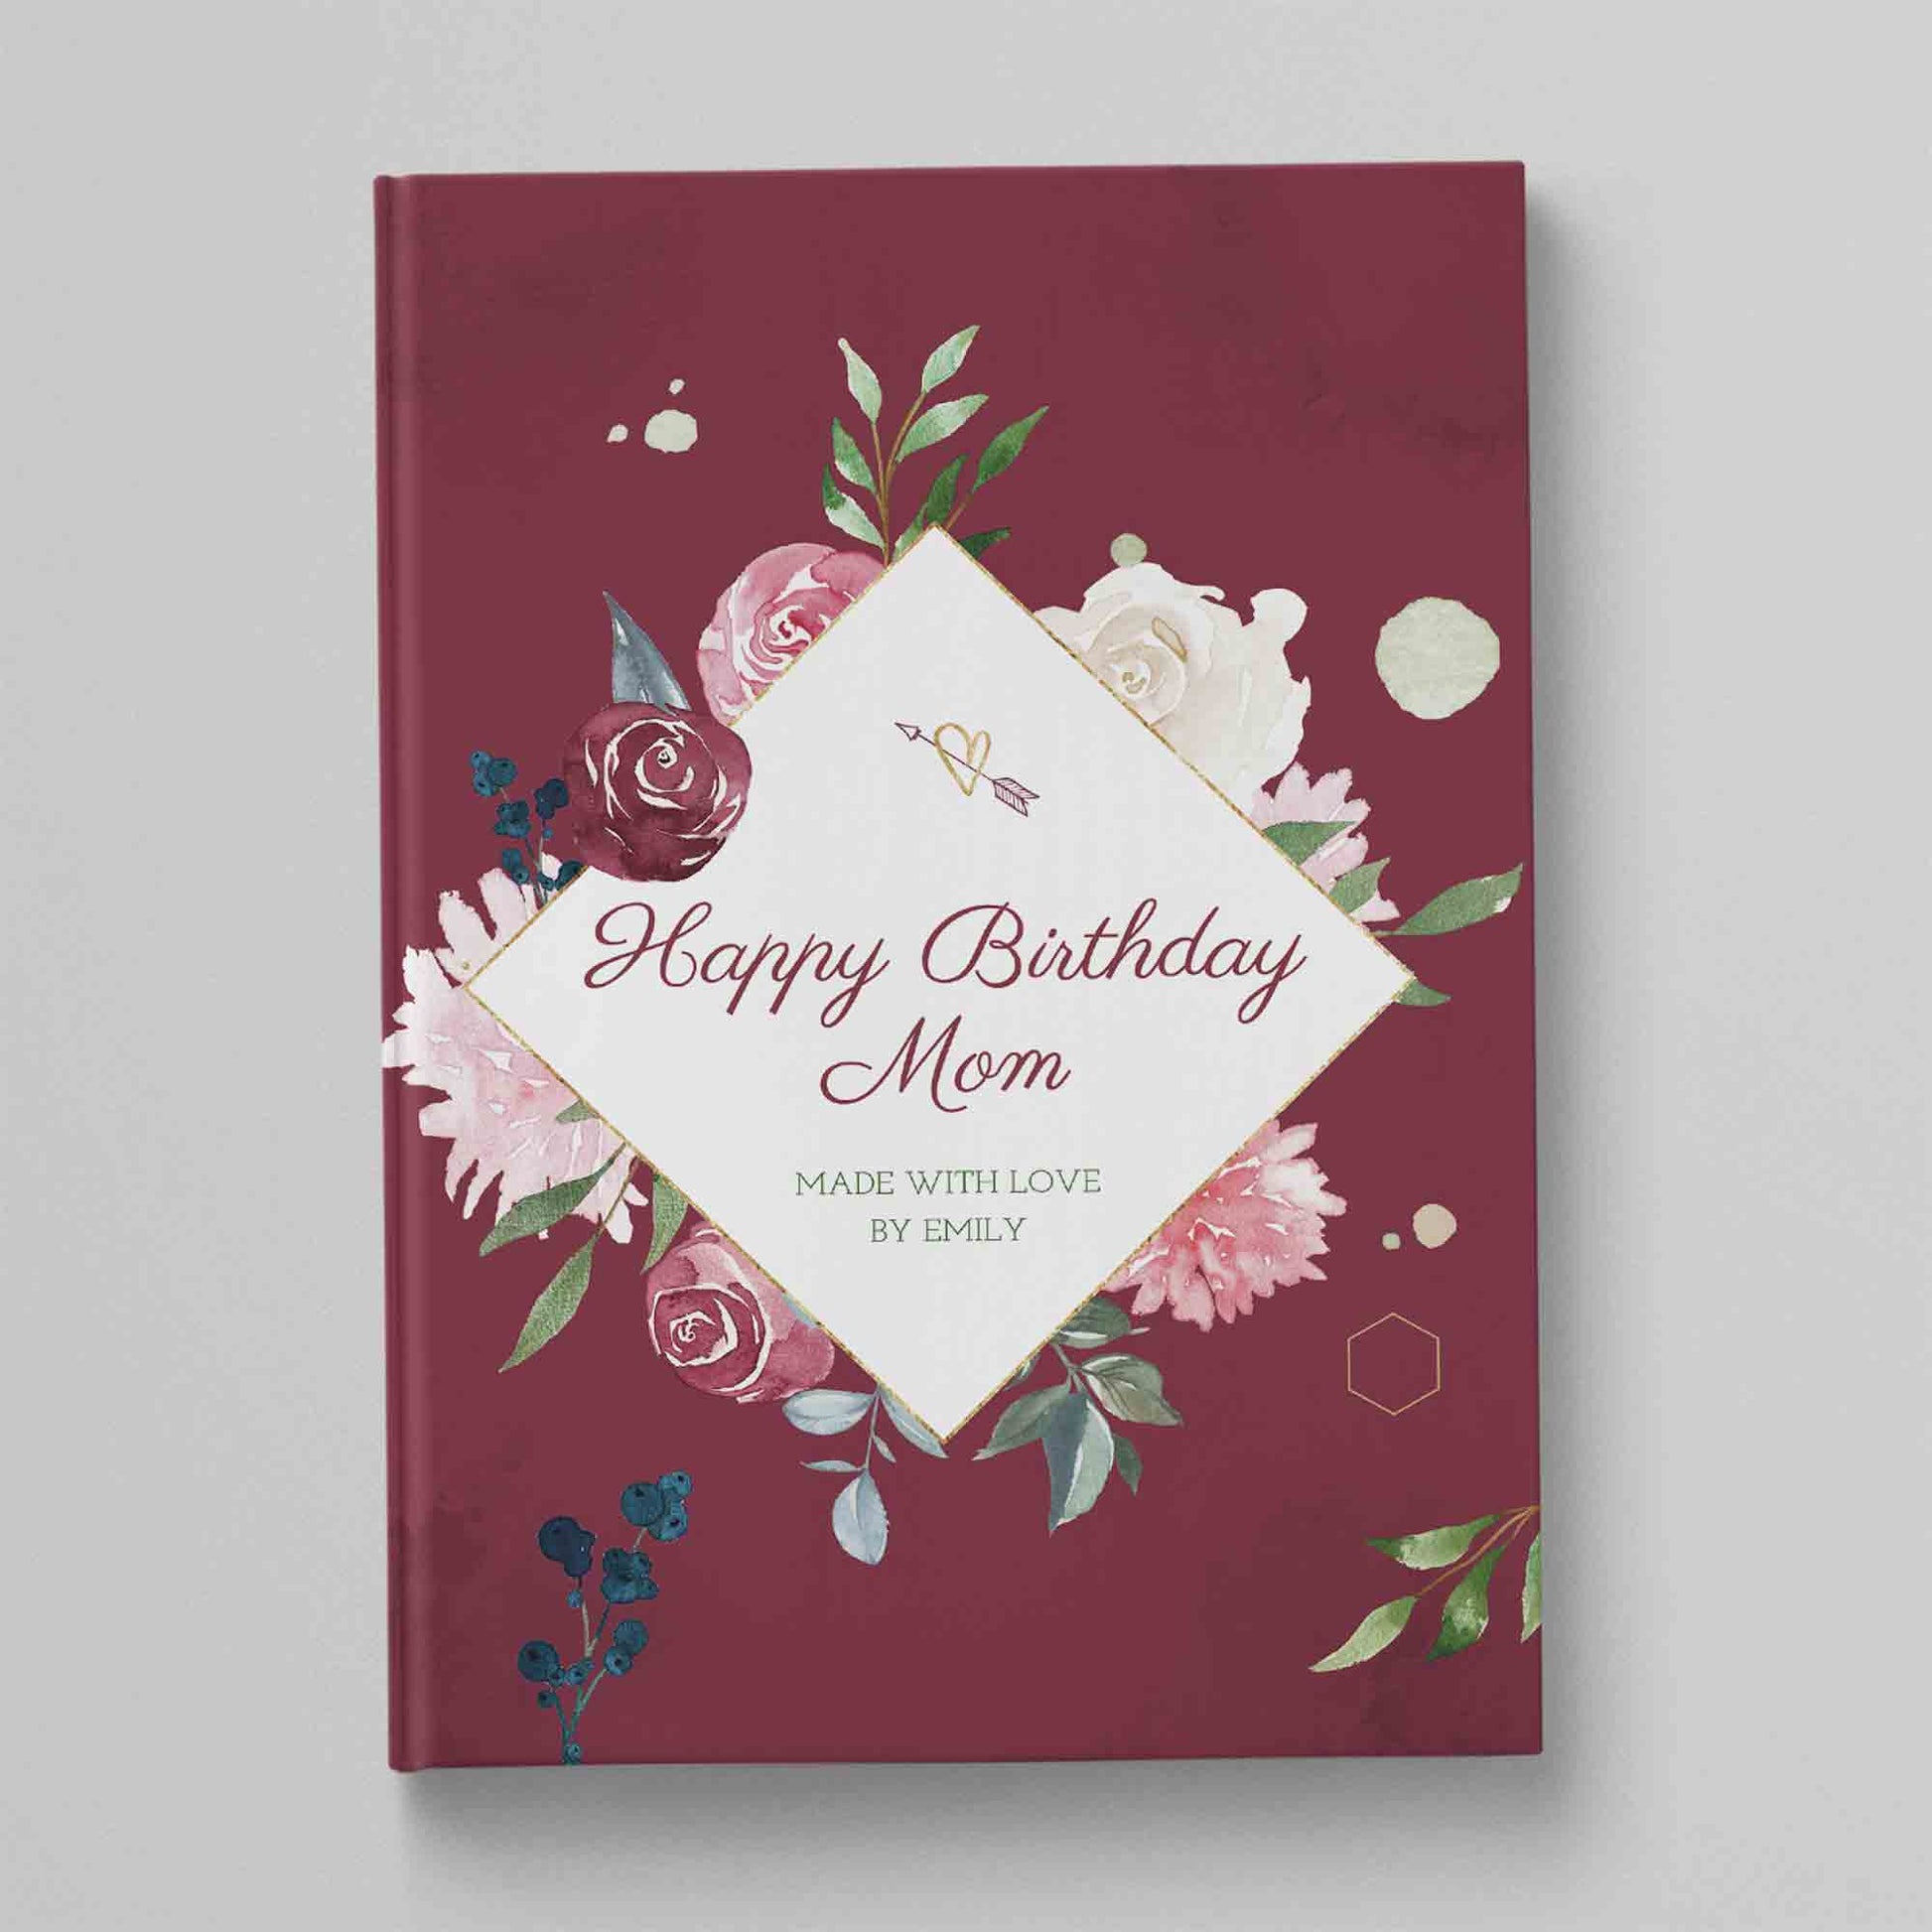 Happy birthday mom personalized book. birthday gift idea for mom. Luhvee Books.